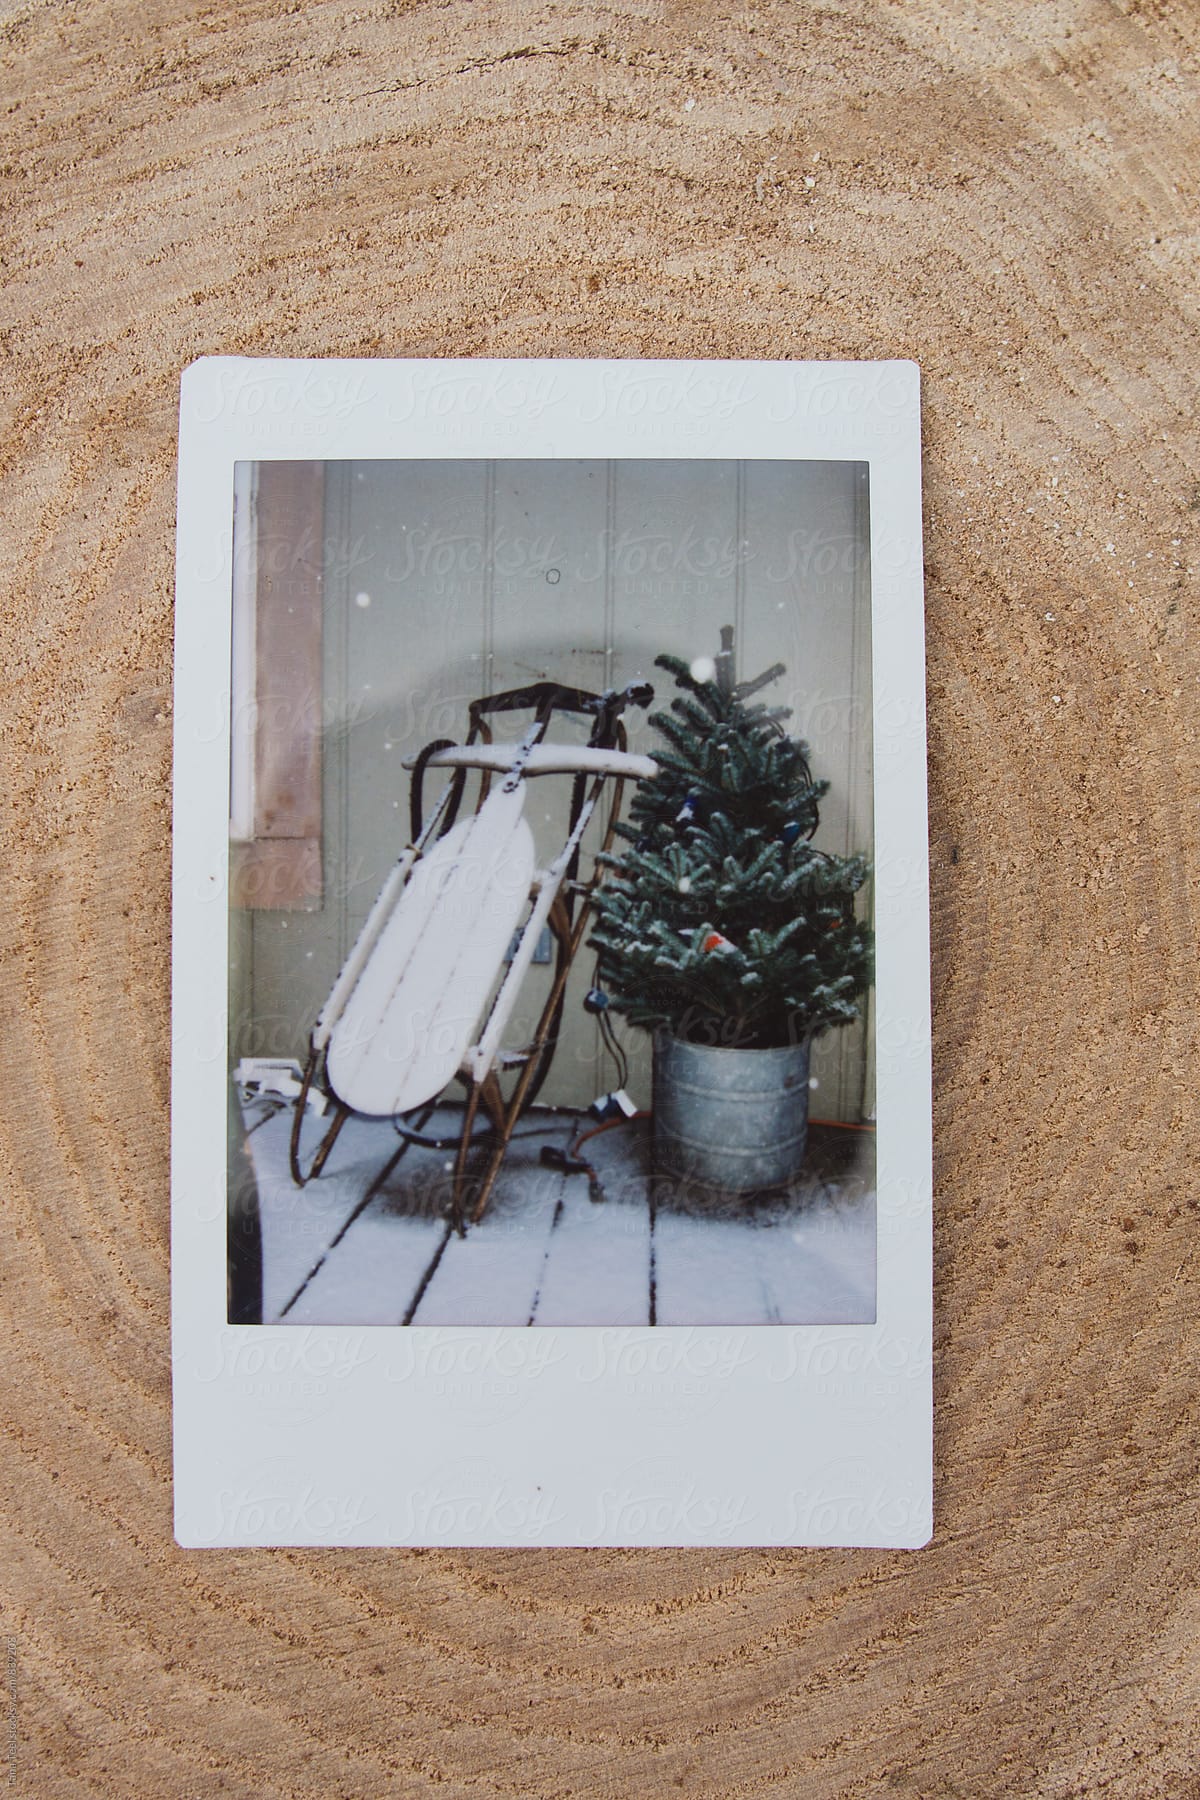 polaroid image of old sled and Christmas tree on porch